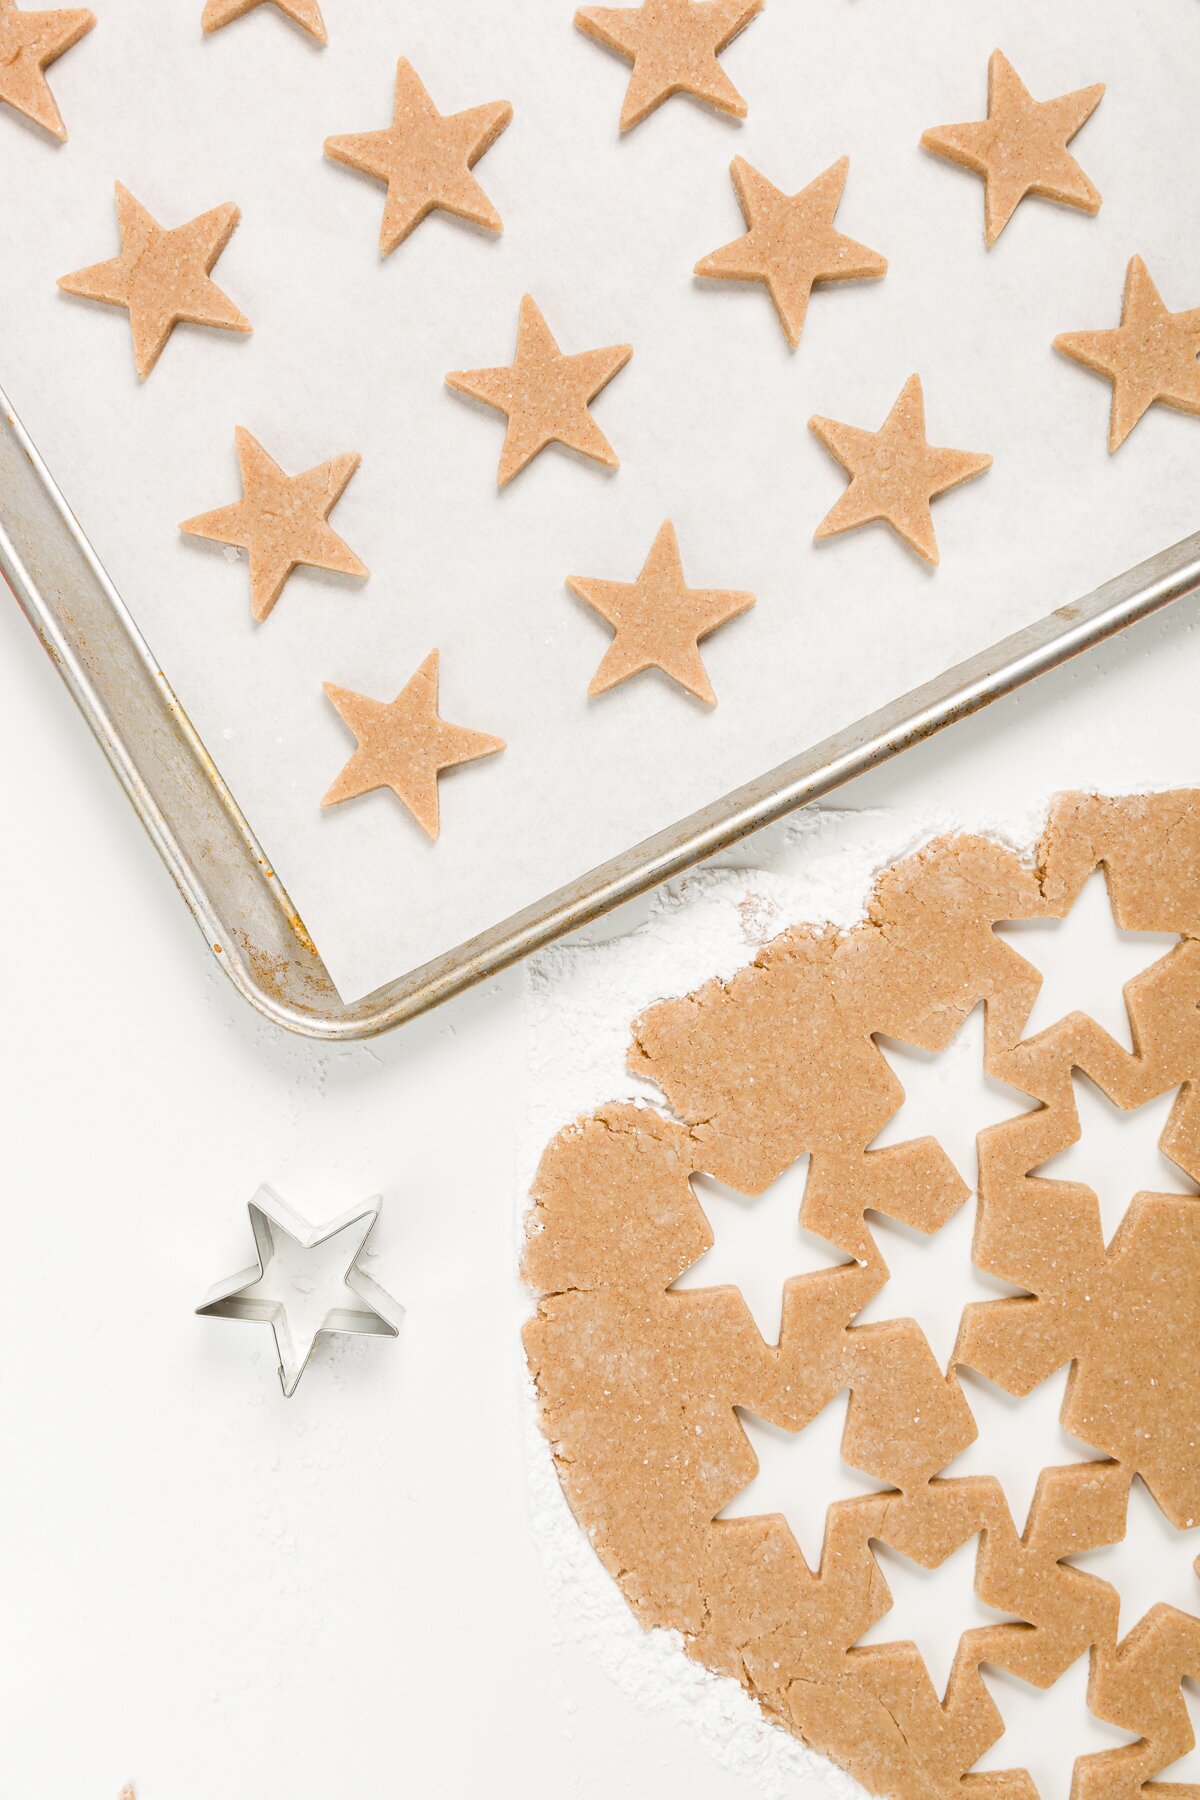 Rolled out cookie dough with stars cut out and cut out stars above it on a parchment-lined cookie sheet